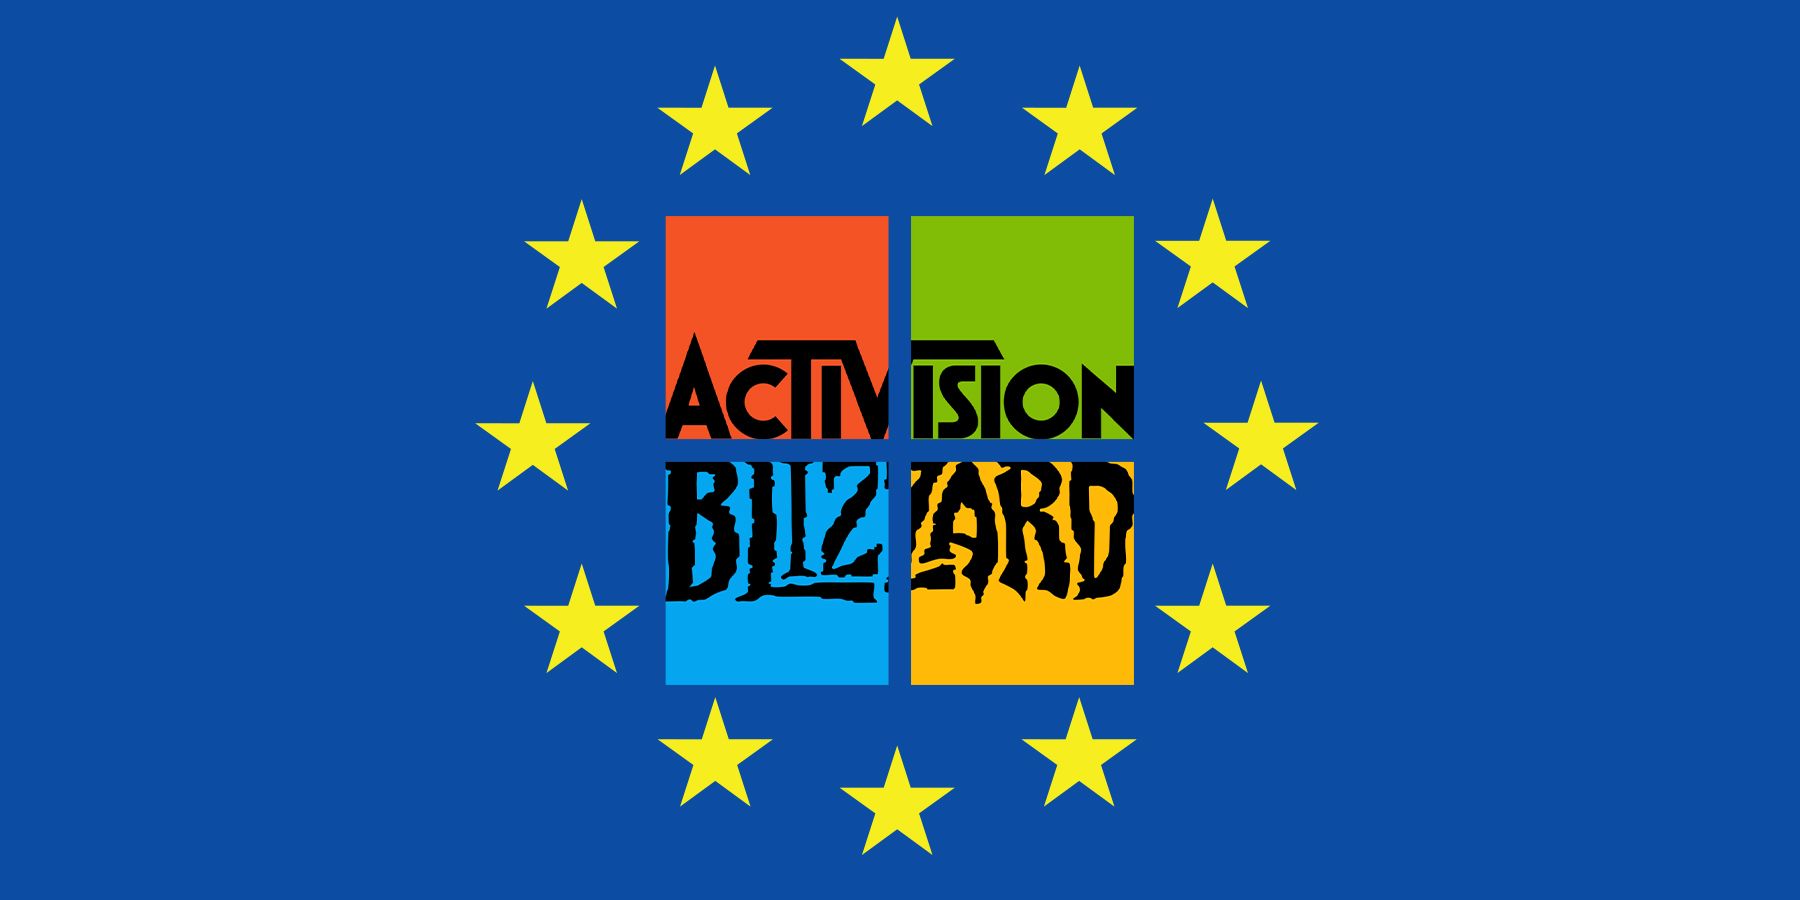 European Commission will reportedly approve Microsoft's Activision